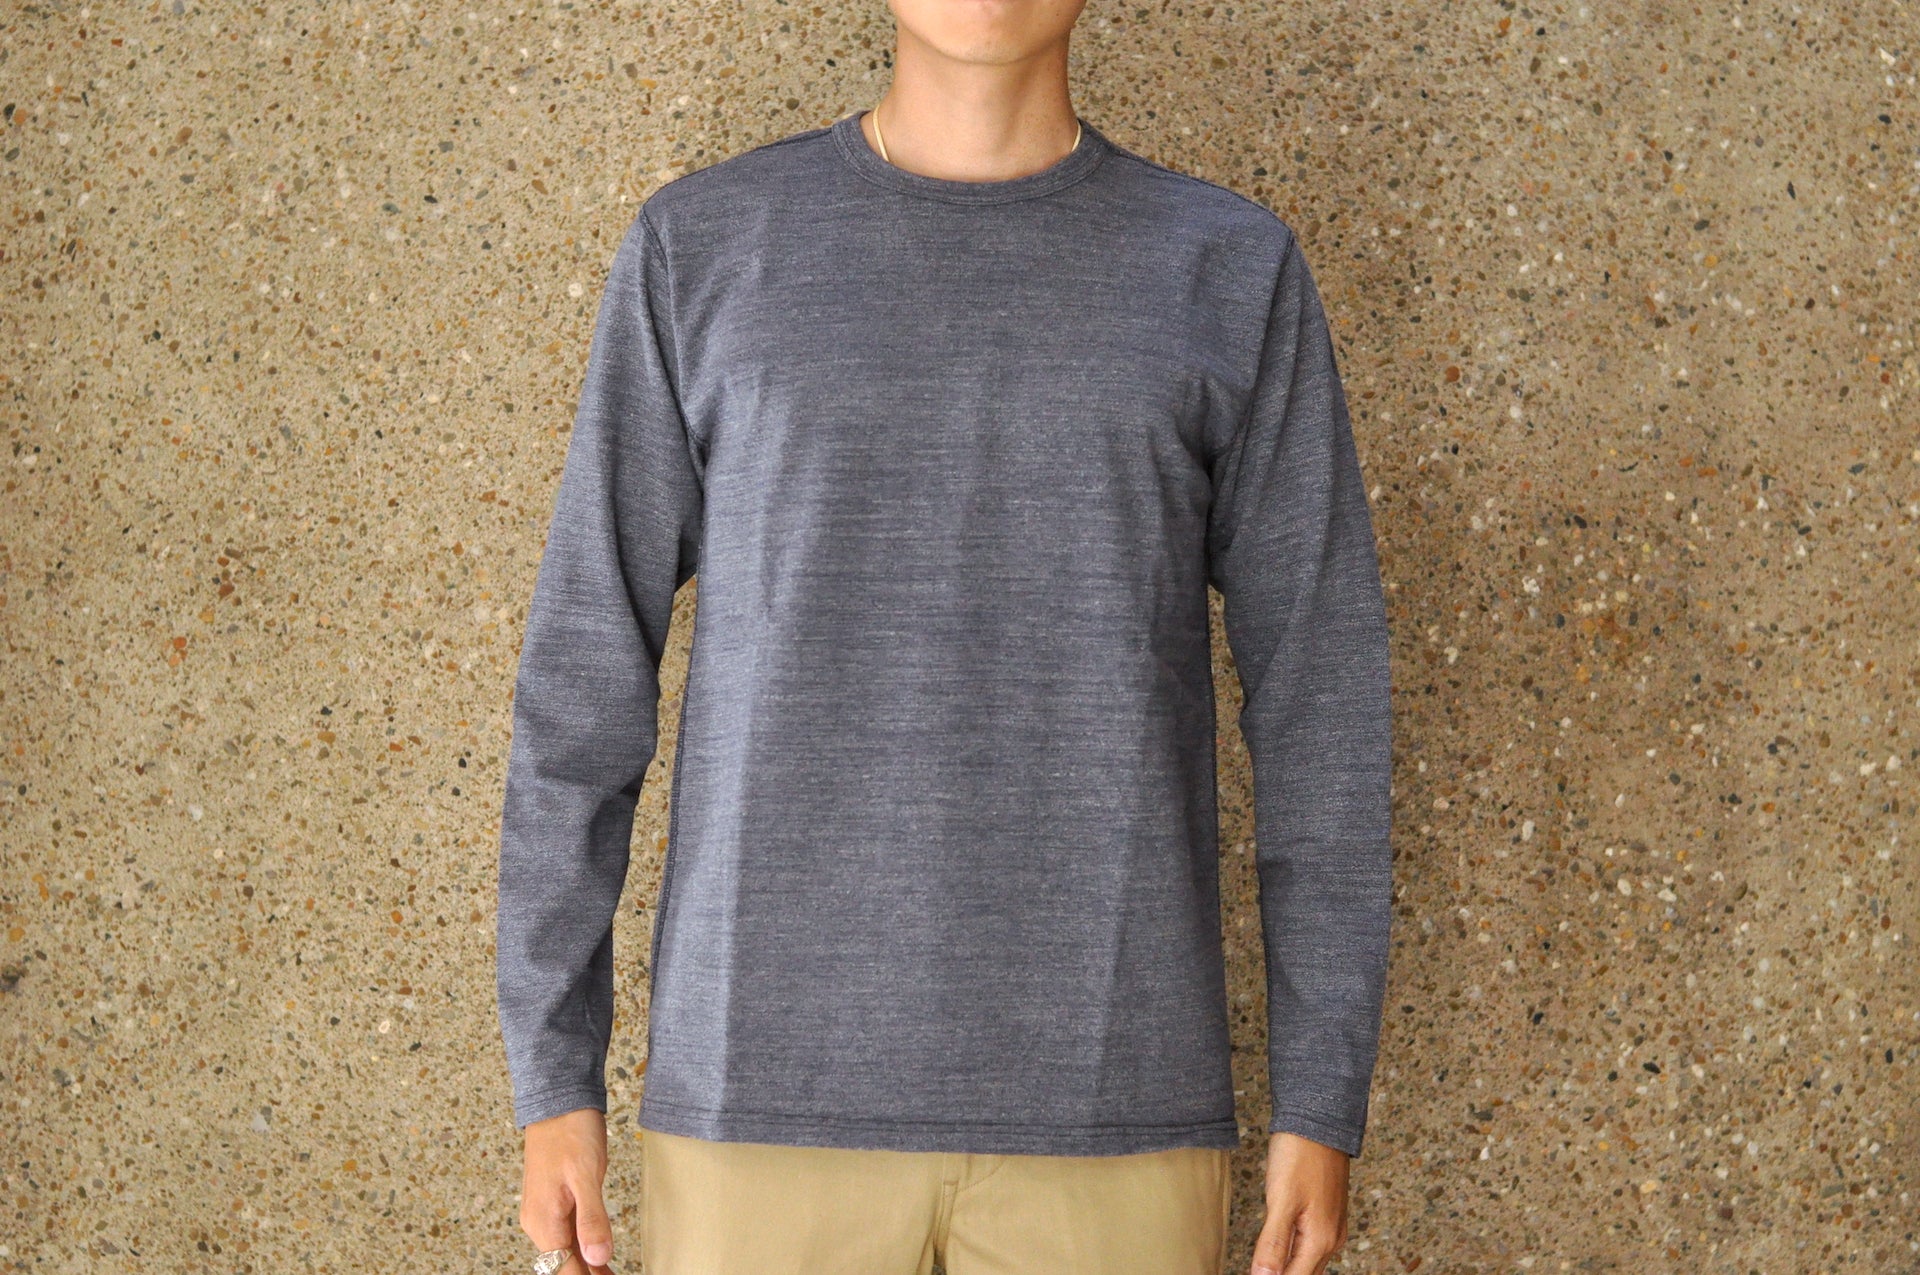 Studio D'Artisan X CORLECTION 7.5oz 'Suvin Gold' Ultimate Loopwheeled L/S Tee (Heather Navy)